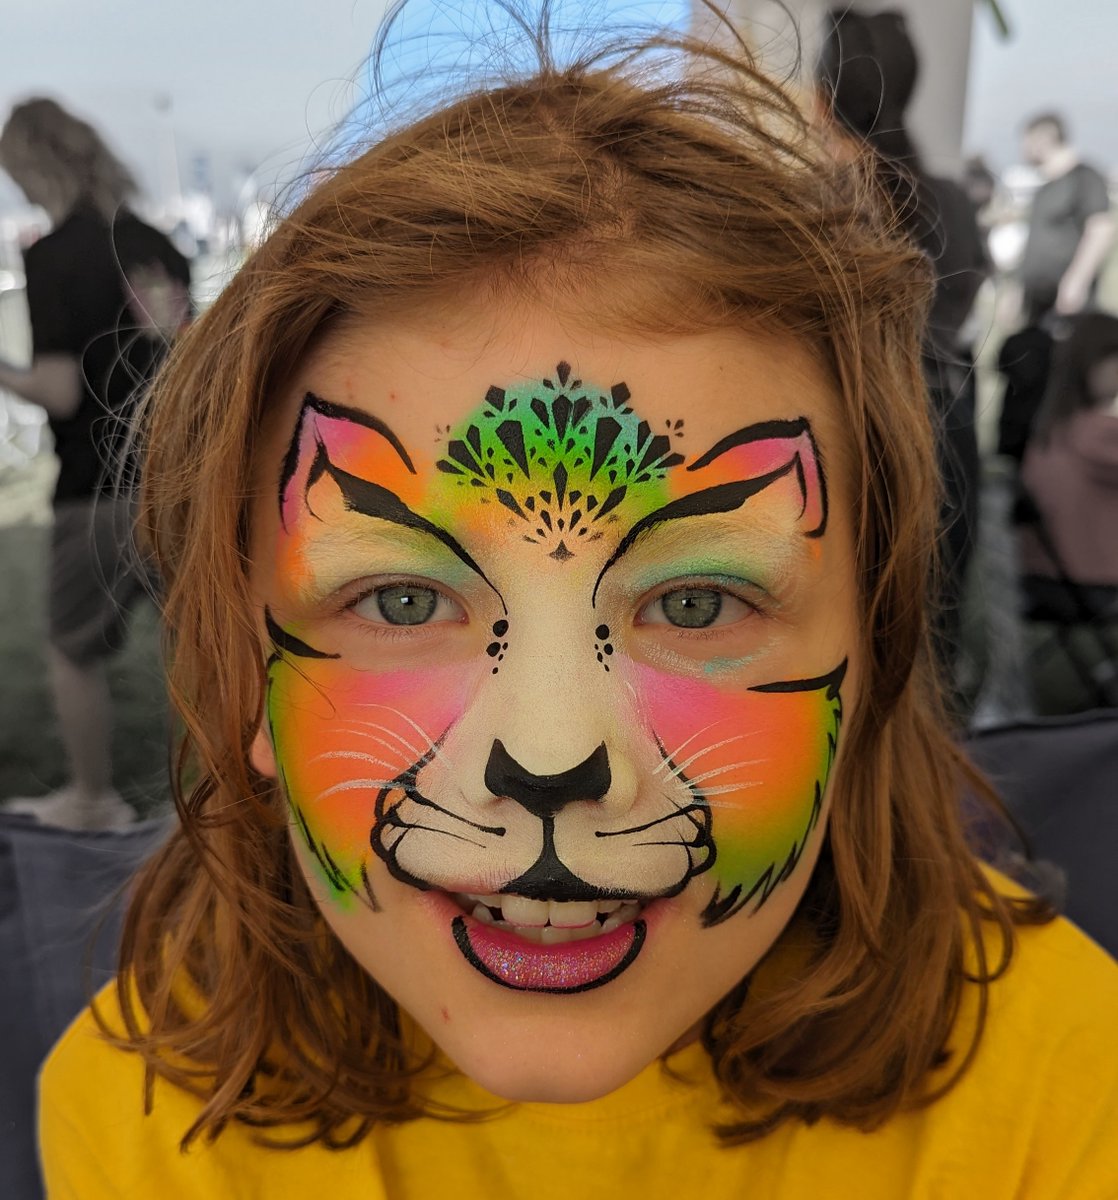 Join us at Paisley Central Library for a morning with face painter Dawn Cuthbertson and some story times! 📚 Wed 10 April 10 – 11.30 For children aged 3+ years. Event is free. No need to book, just drop in! For more Easter Holiday Activities click here👉bit.ly/43yz8wv